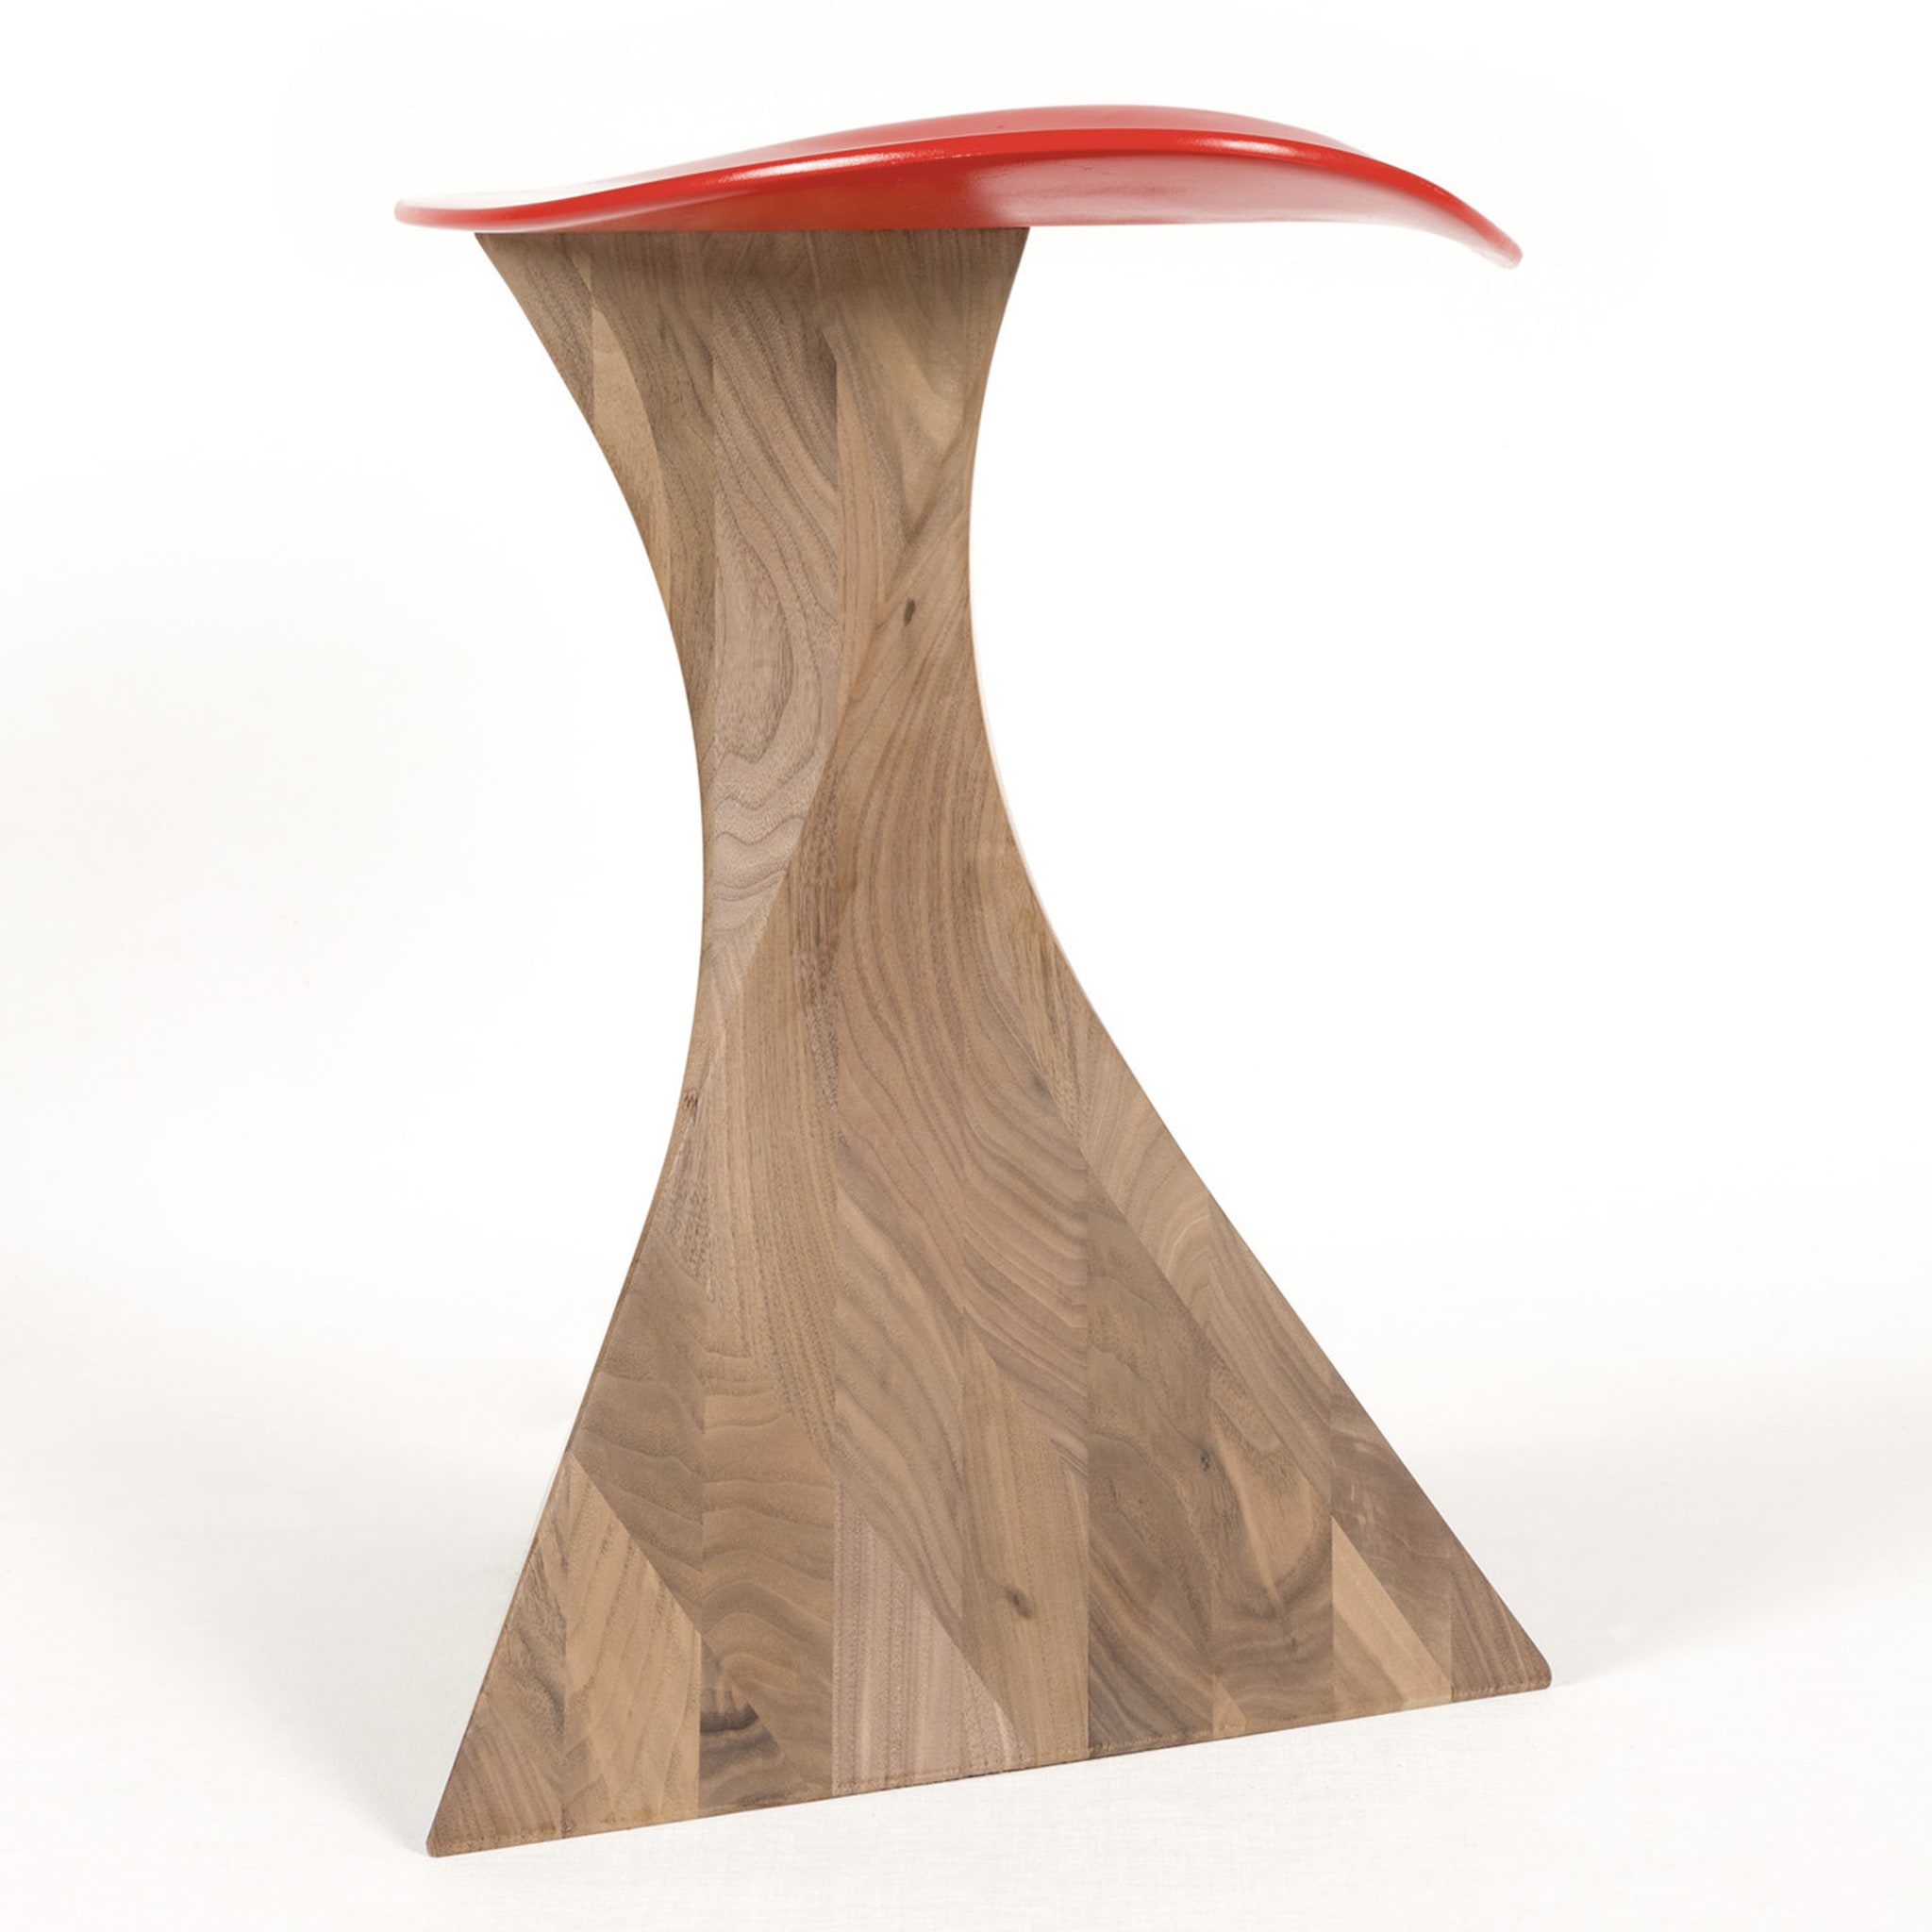 Audrey Red Stool by Mauro Dell'Orco - Alternative view 1